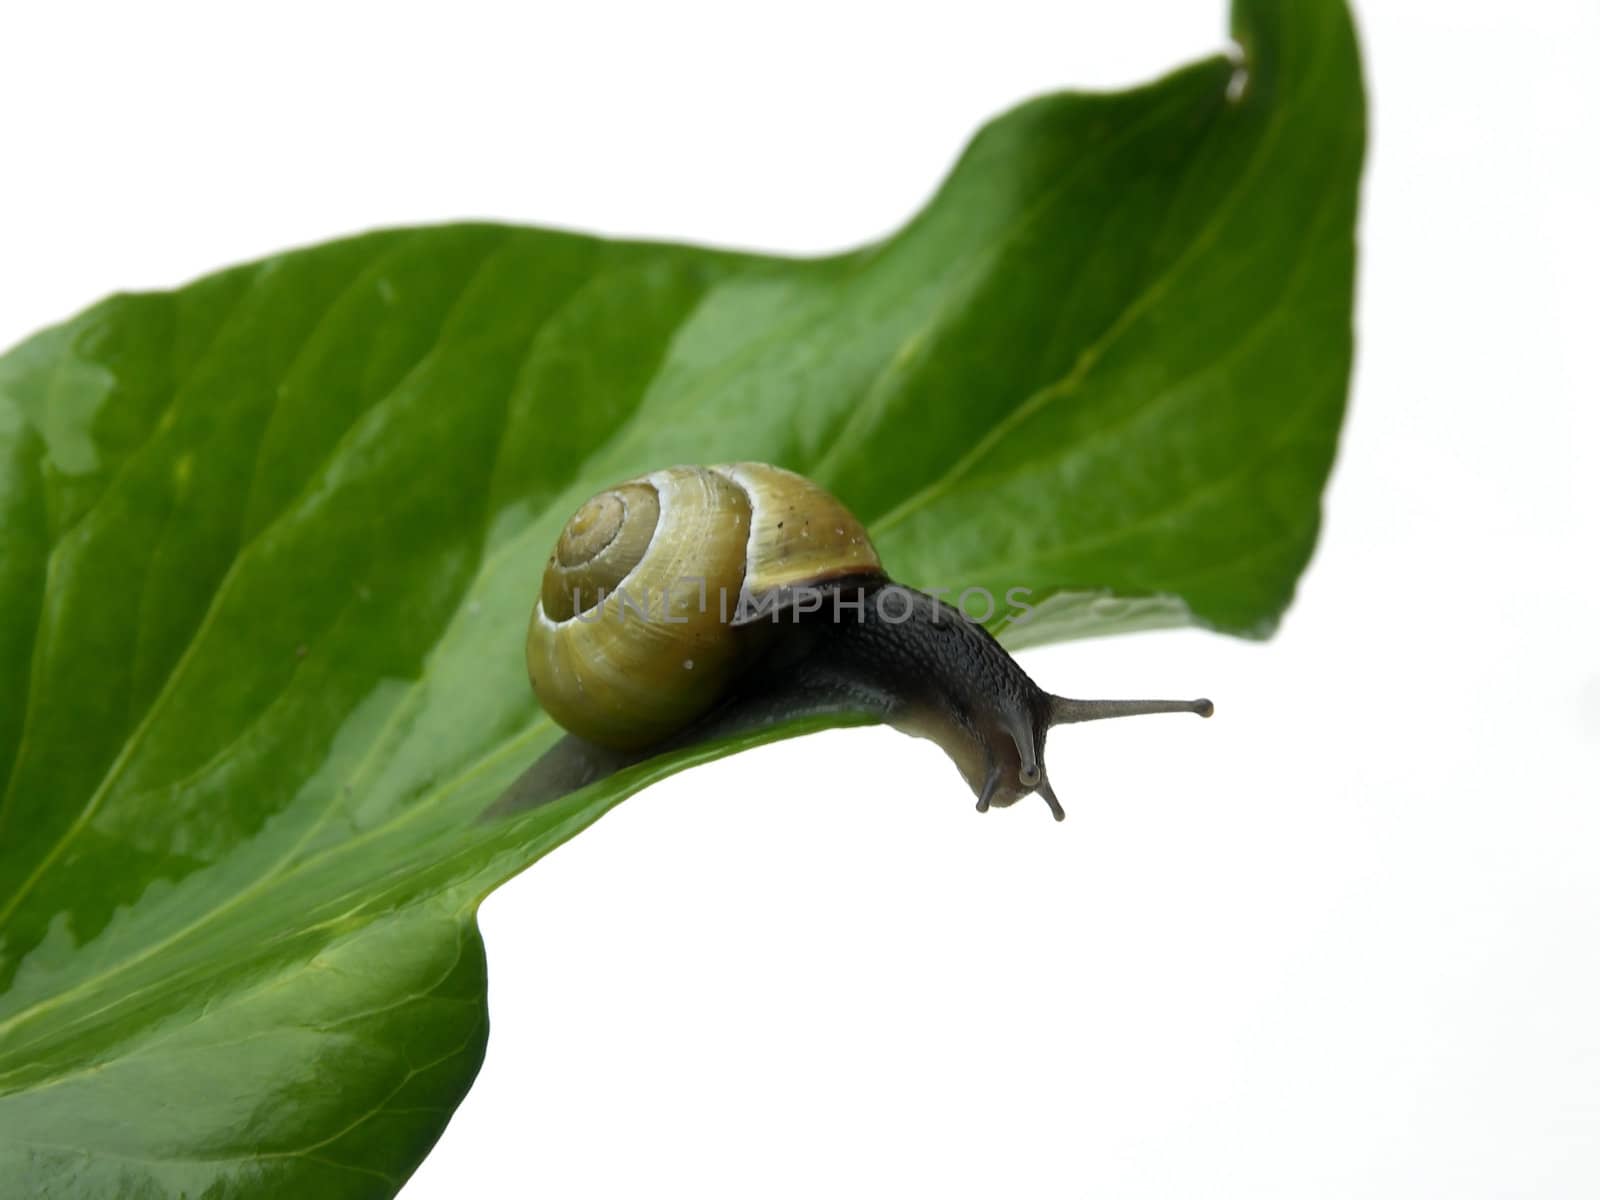 Snail is looking over the edge of a leaf, isolated on white.